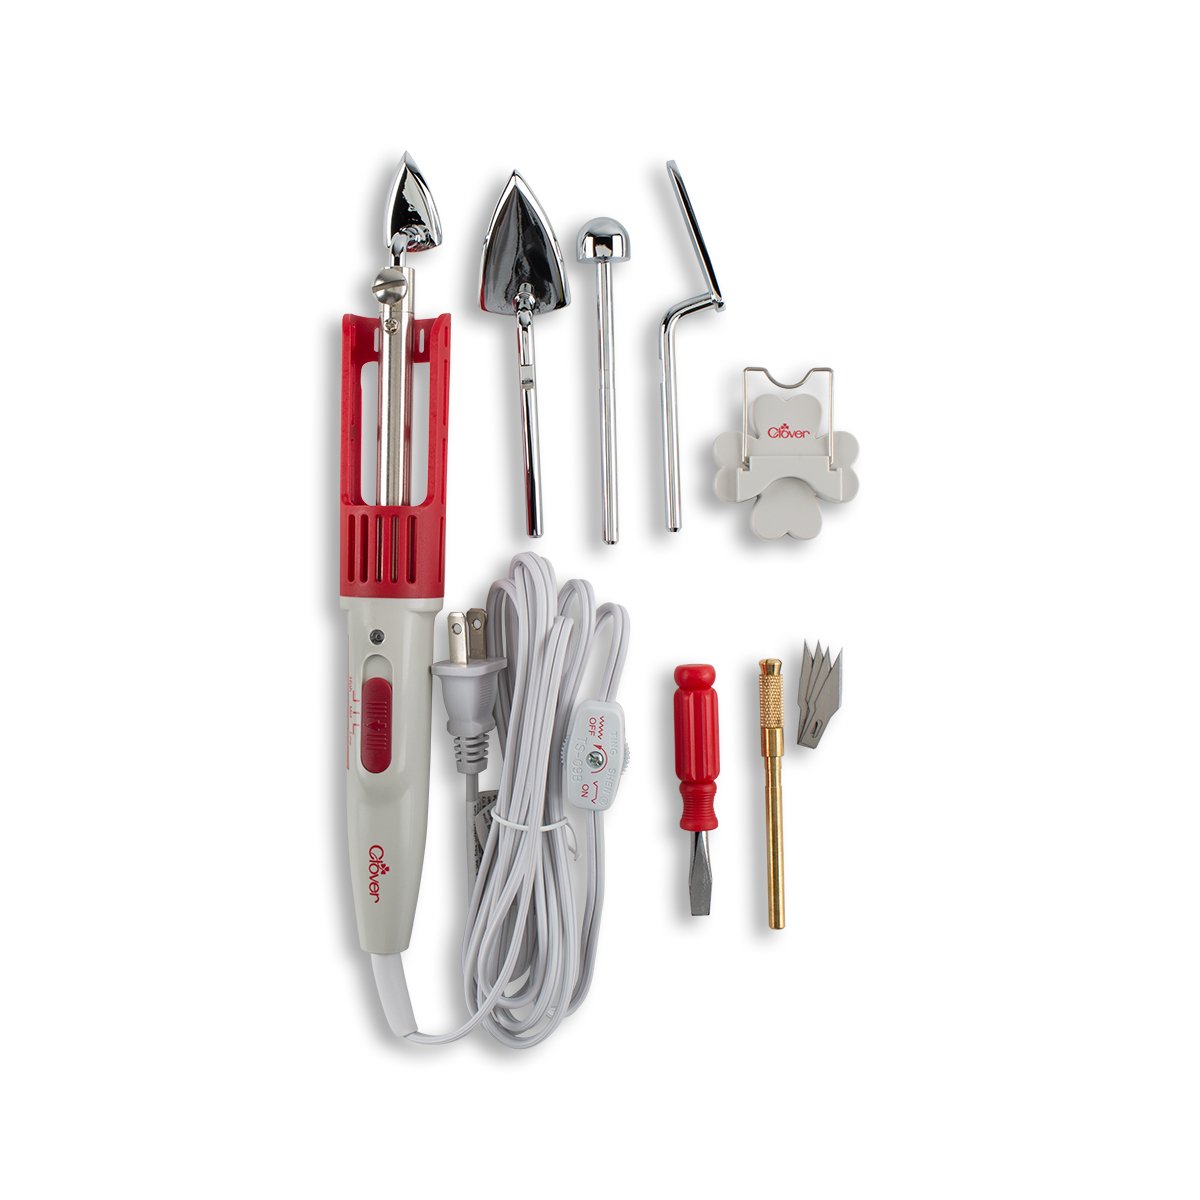 Clover Mini Iron II and The Adapters Set